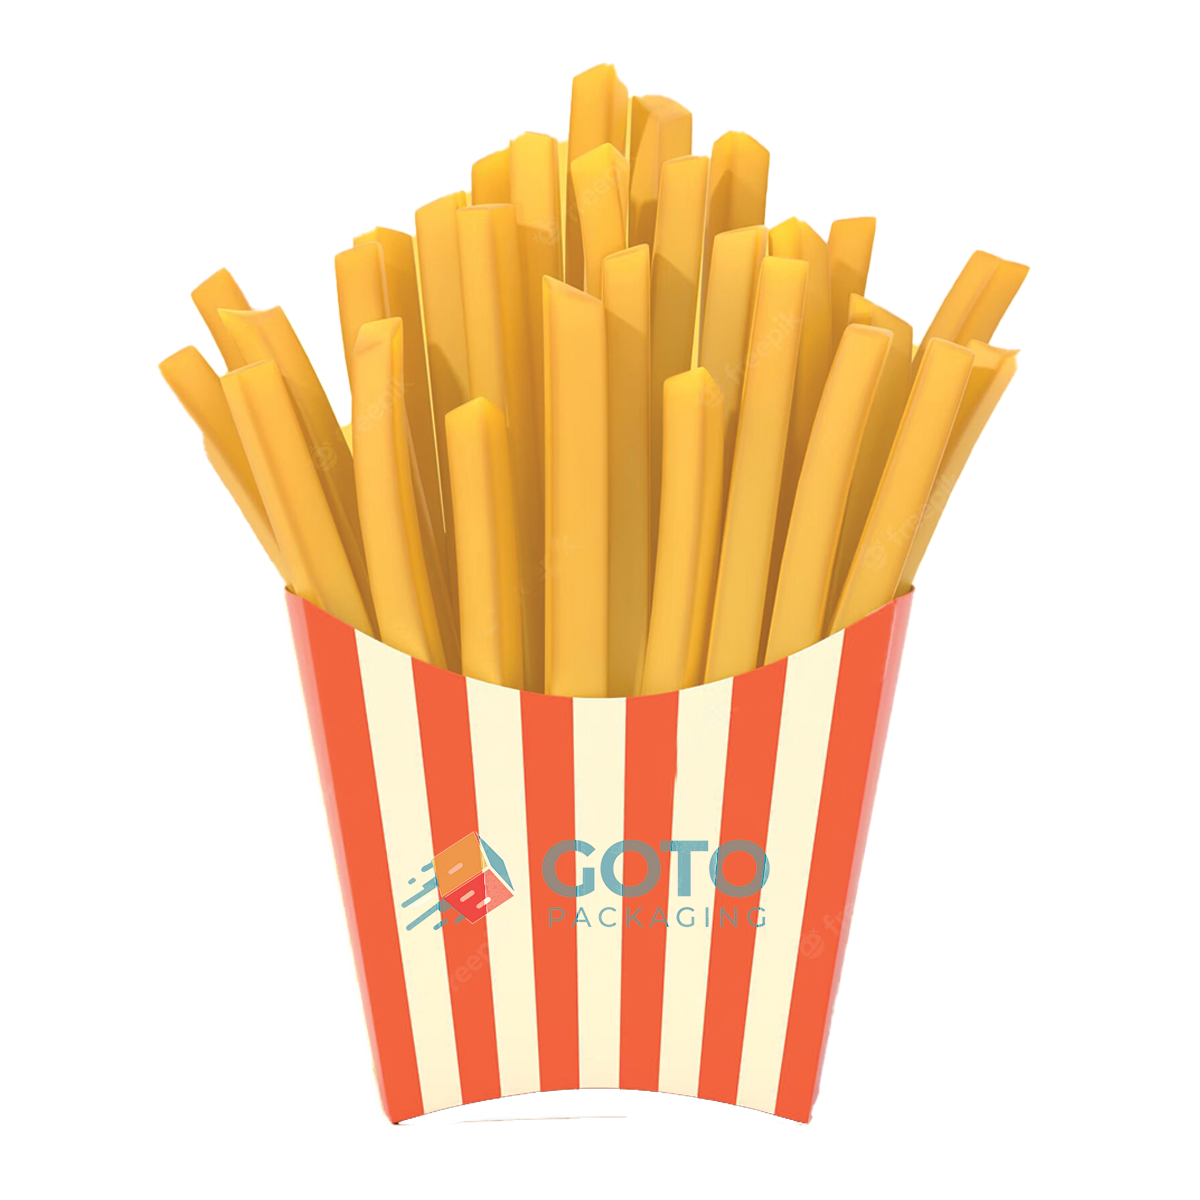 Custom French Fry Containers